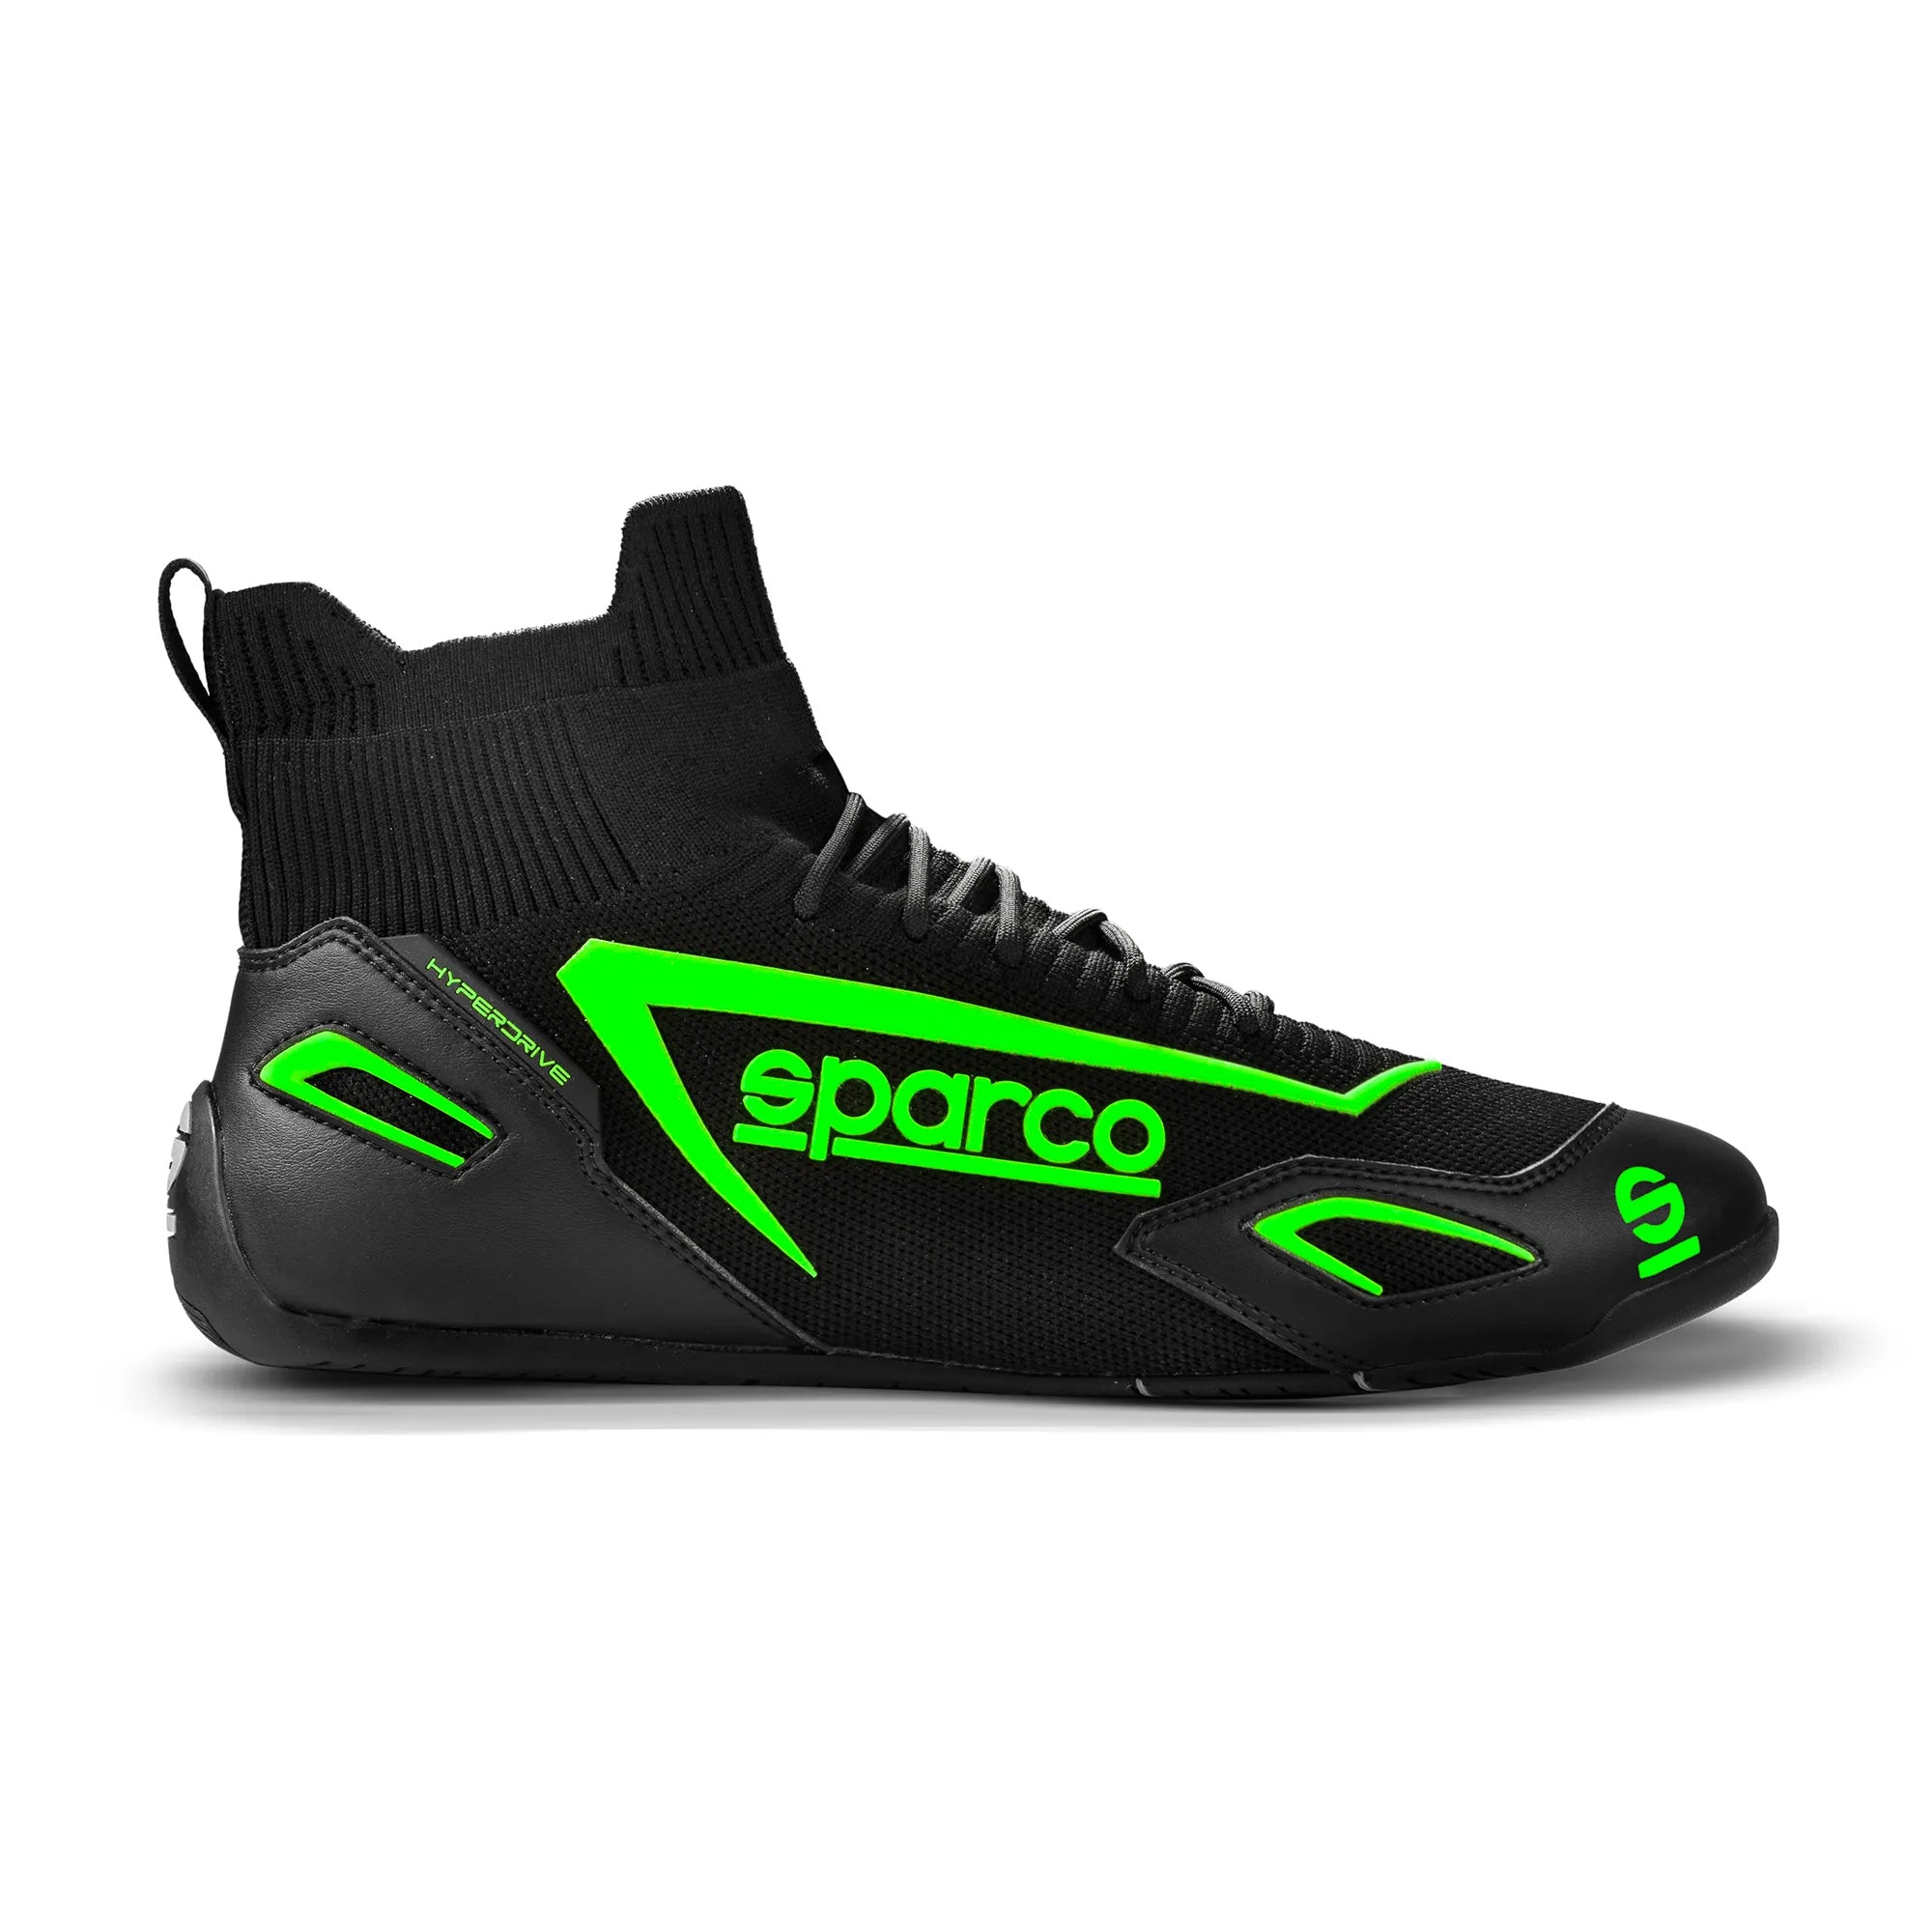 SPARCO 00129346NRVF Gaming sim racing shoes HYPERDRIVE, black/green, size 46 Photo-0 